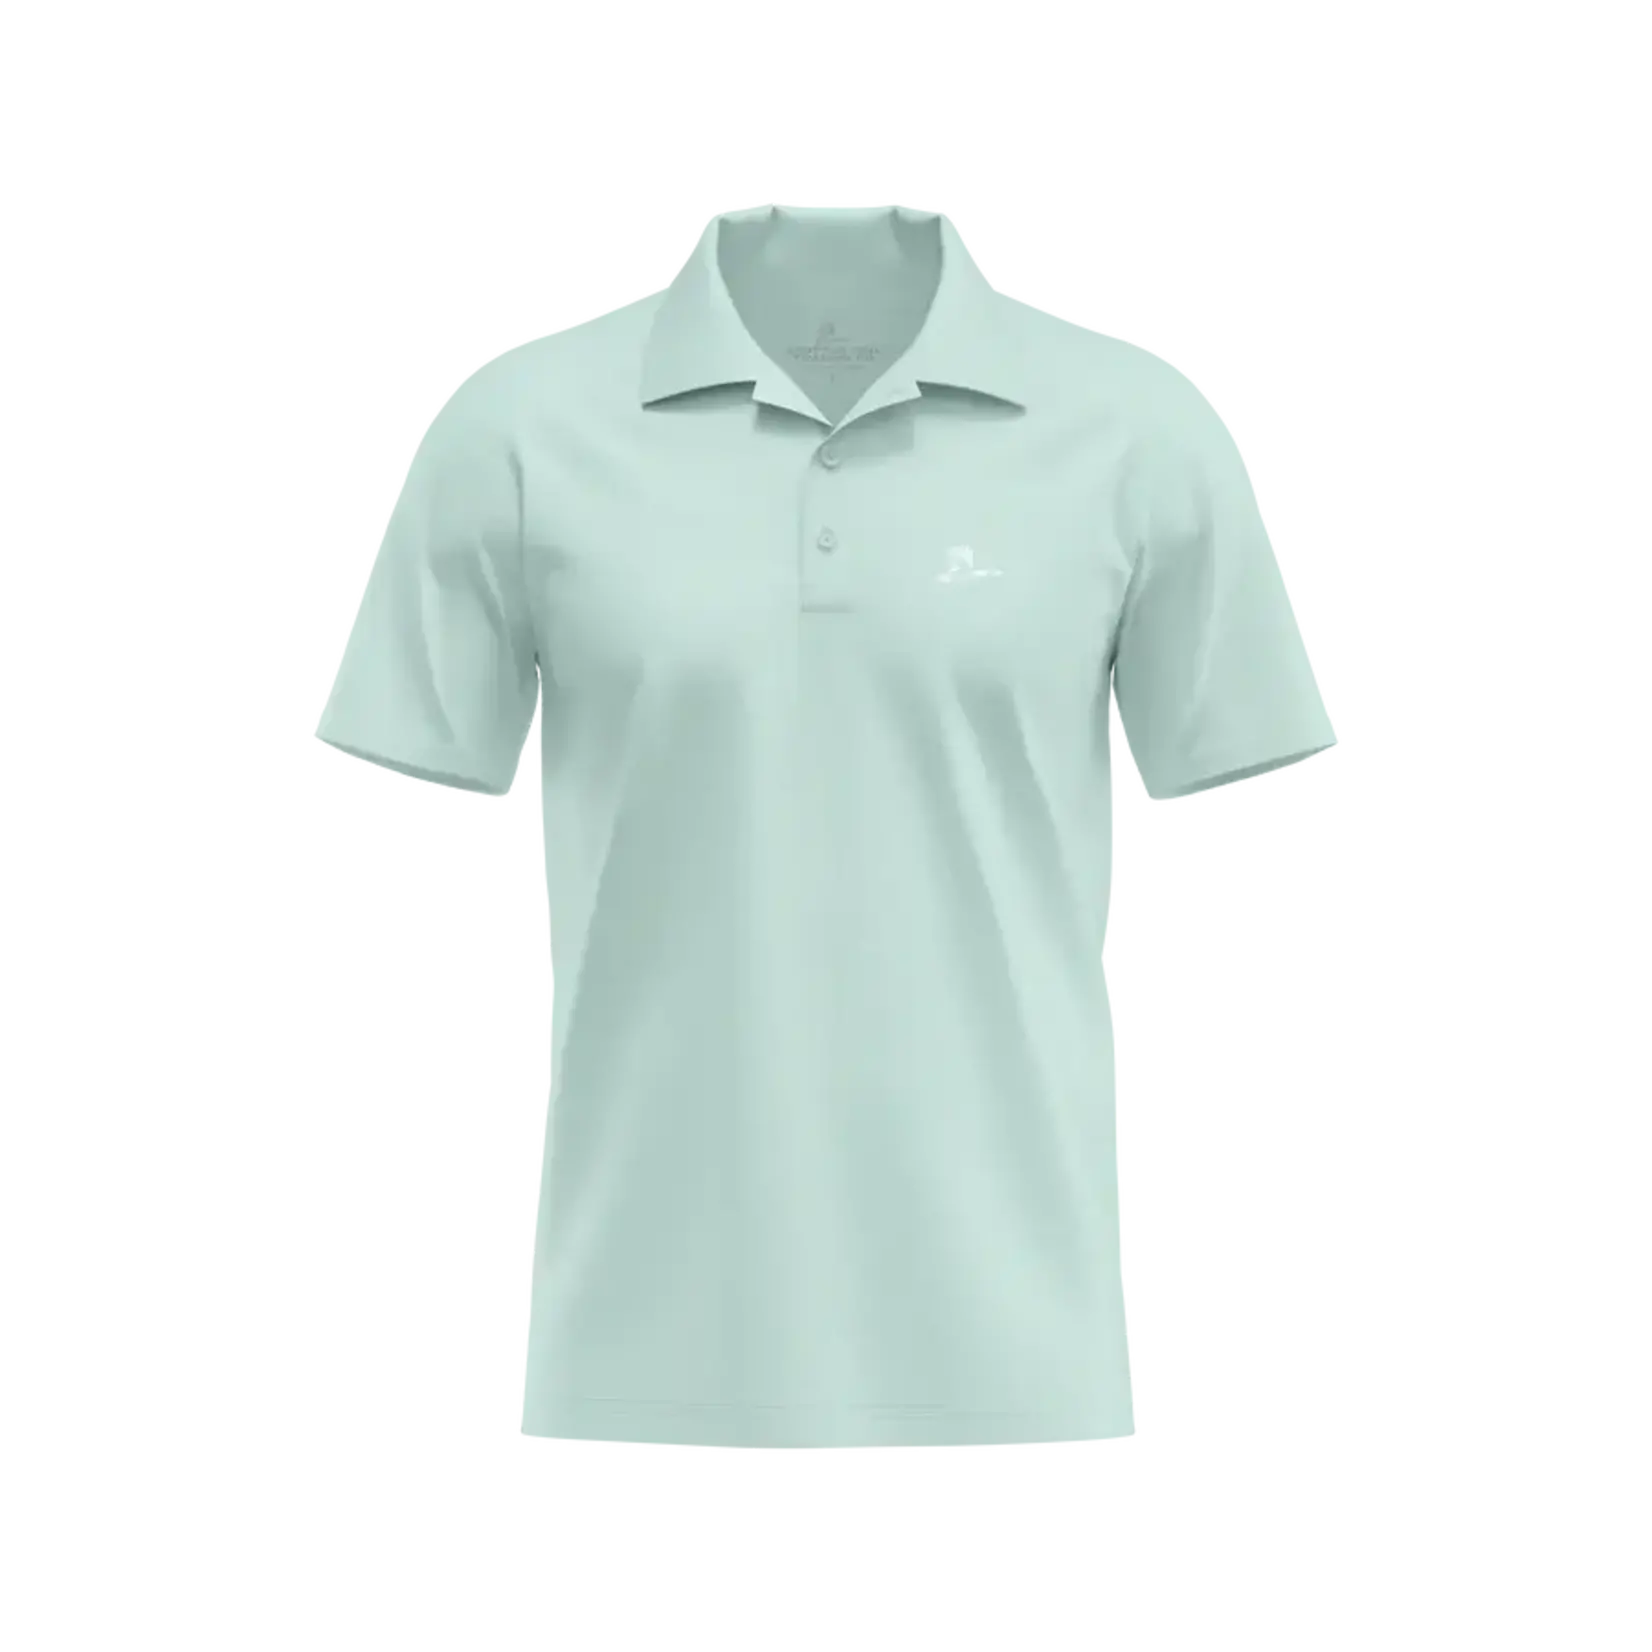 Knotted Pine Knotted Pine Trading Co. Fairway Polo Shirt